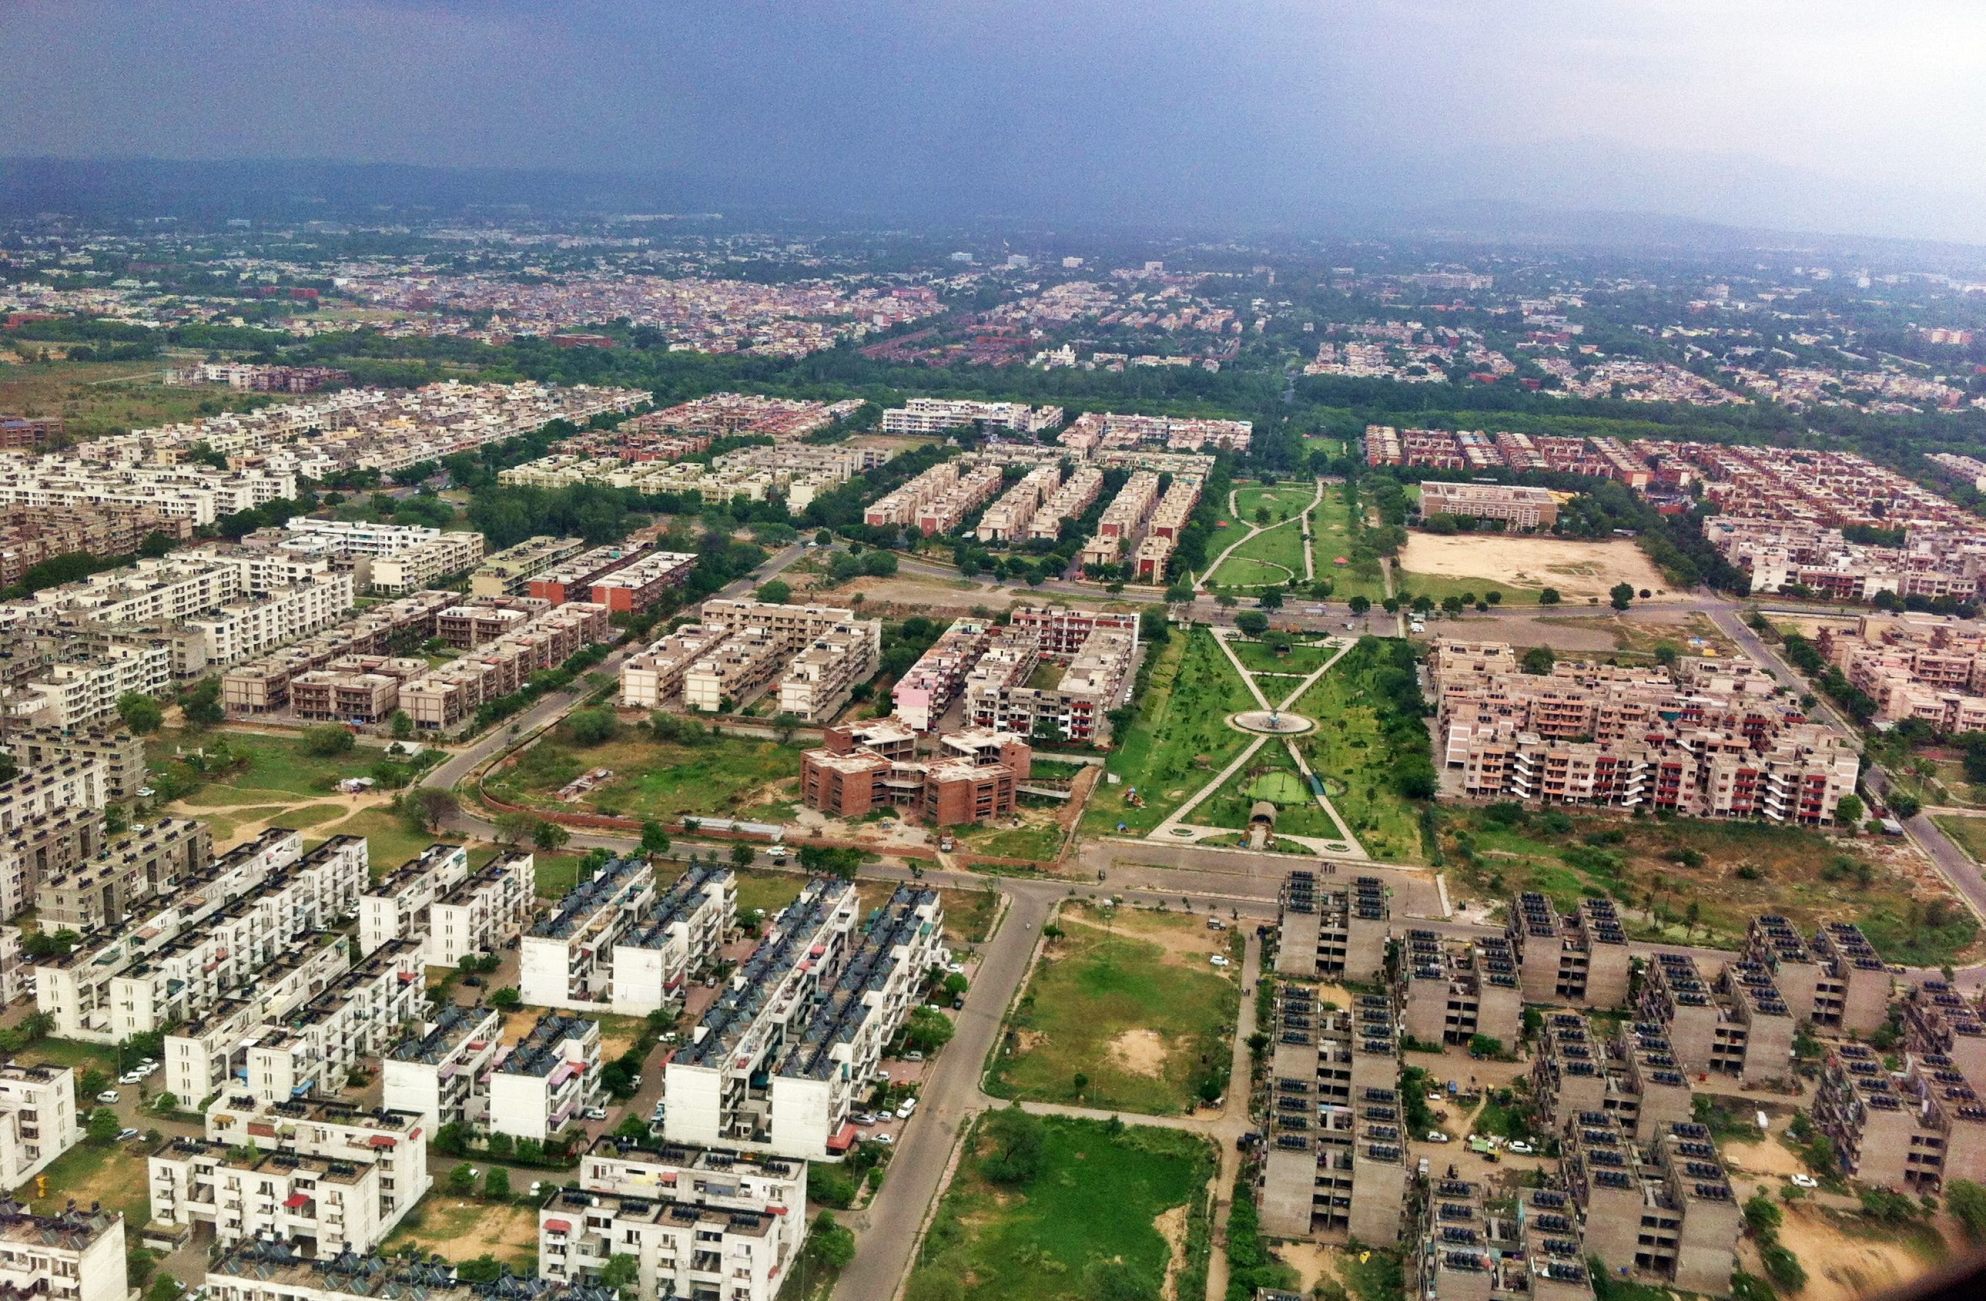 Aerial view of Chandigarh city